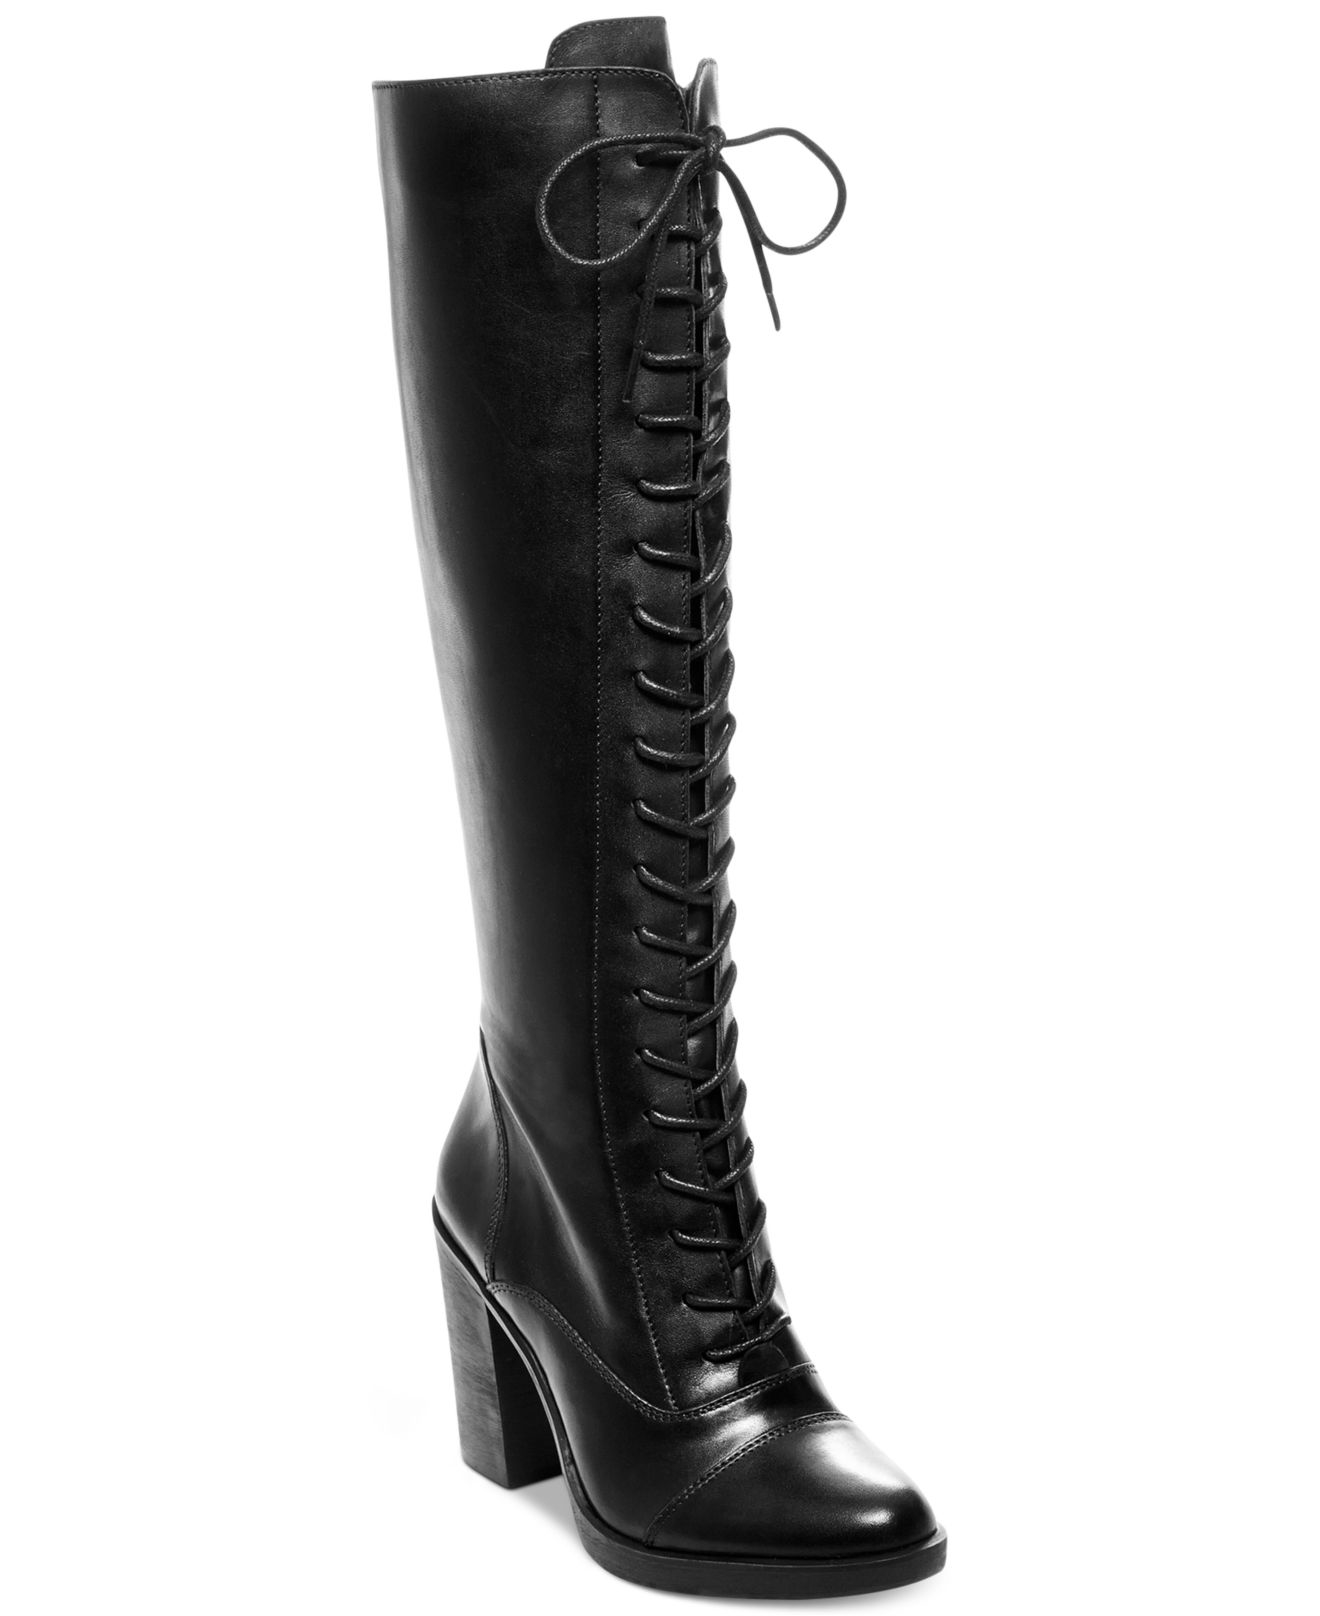 steve madden tie up boots